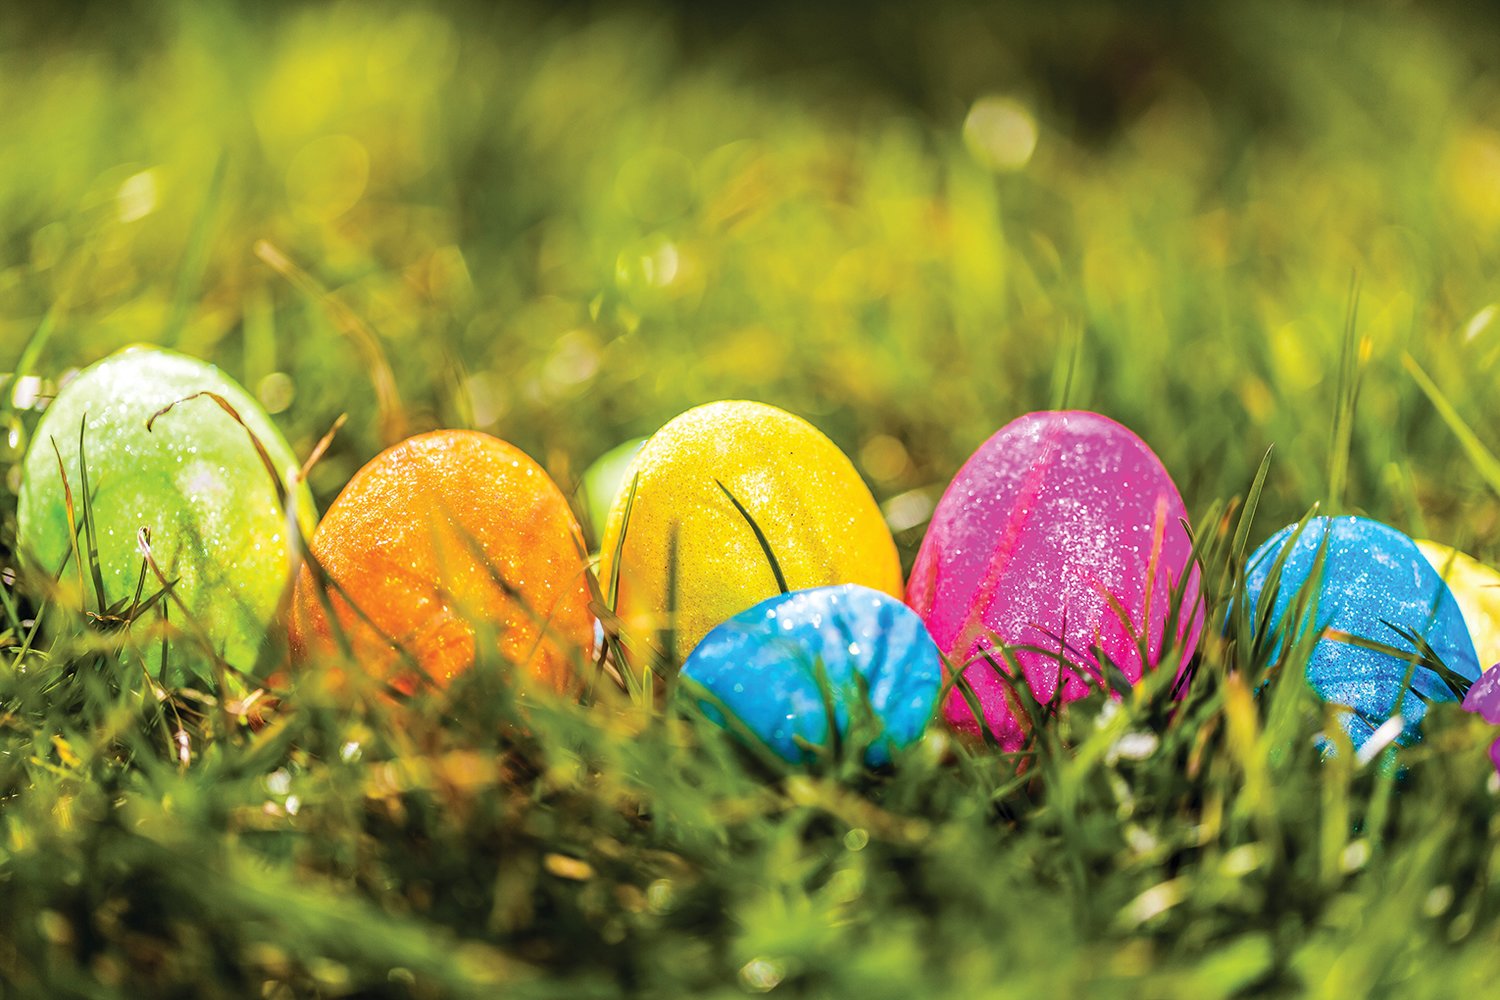 Augusta Presbyterian Church will hold its annual Easter egg hunt on Saturday, April 8.